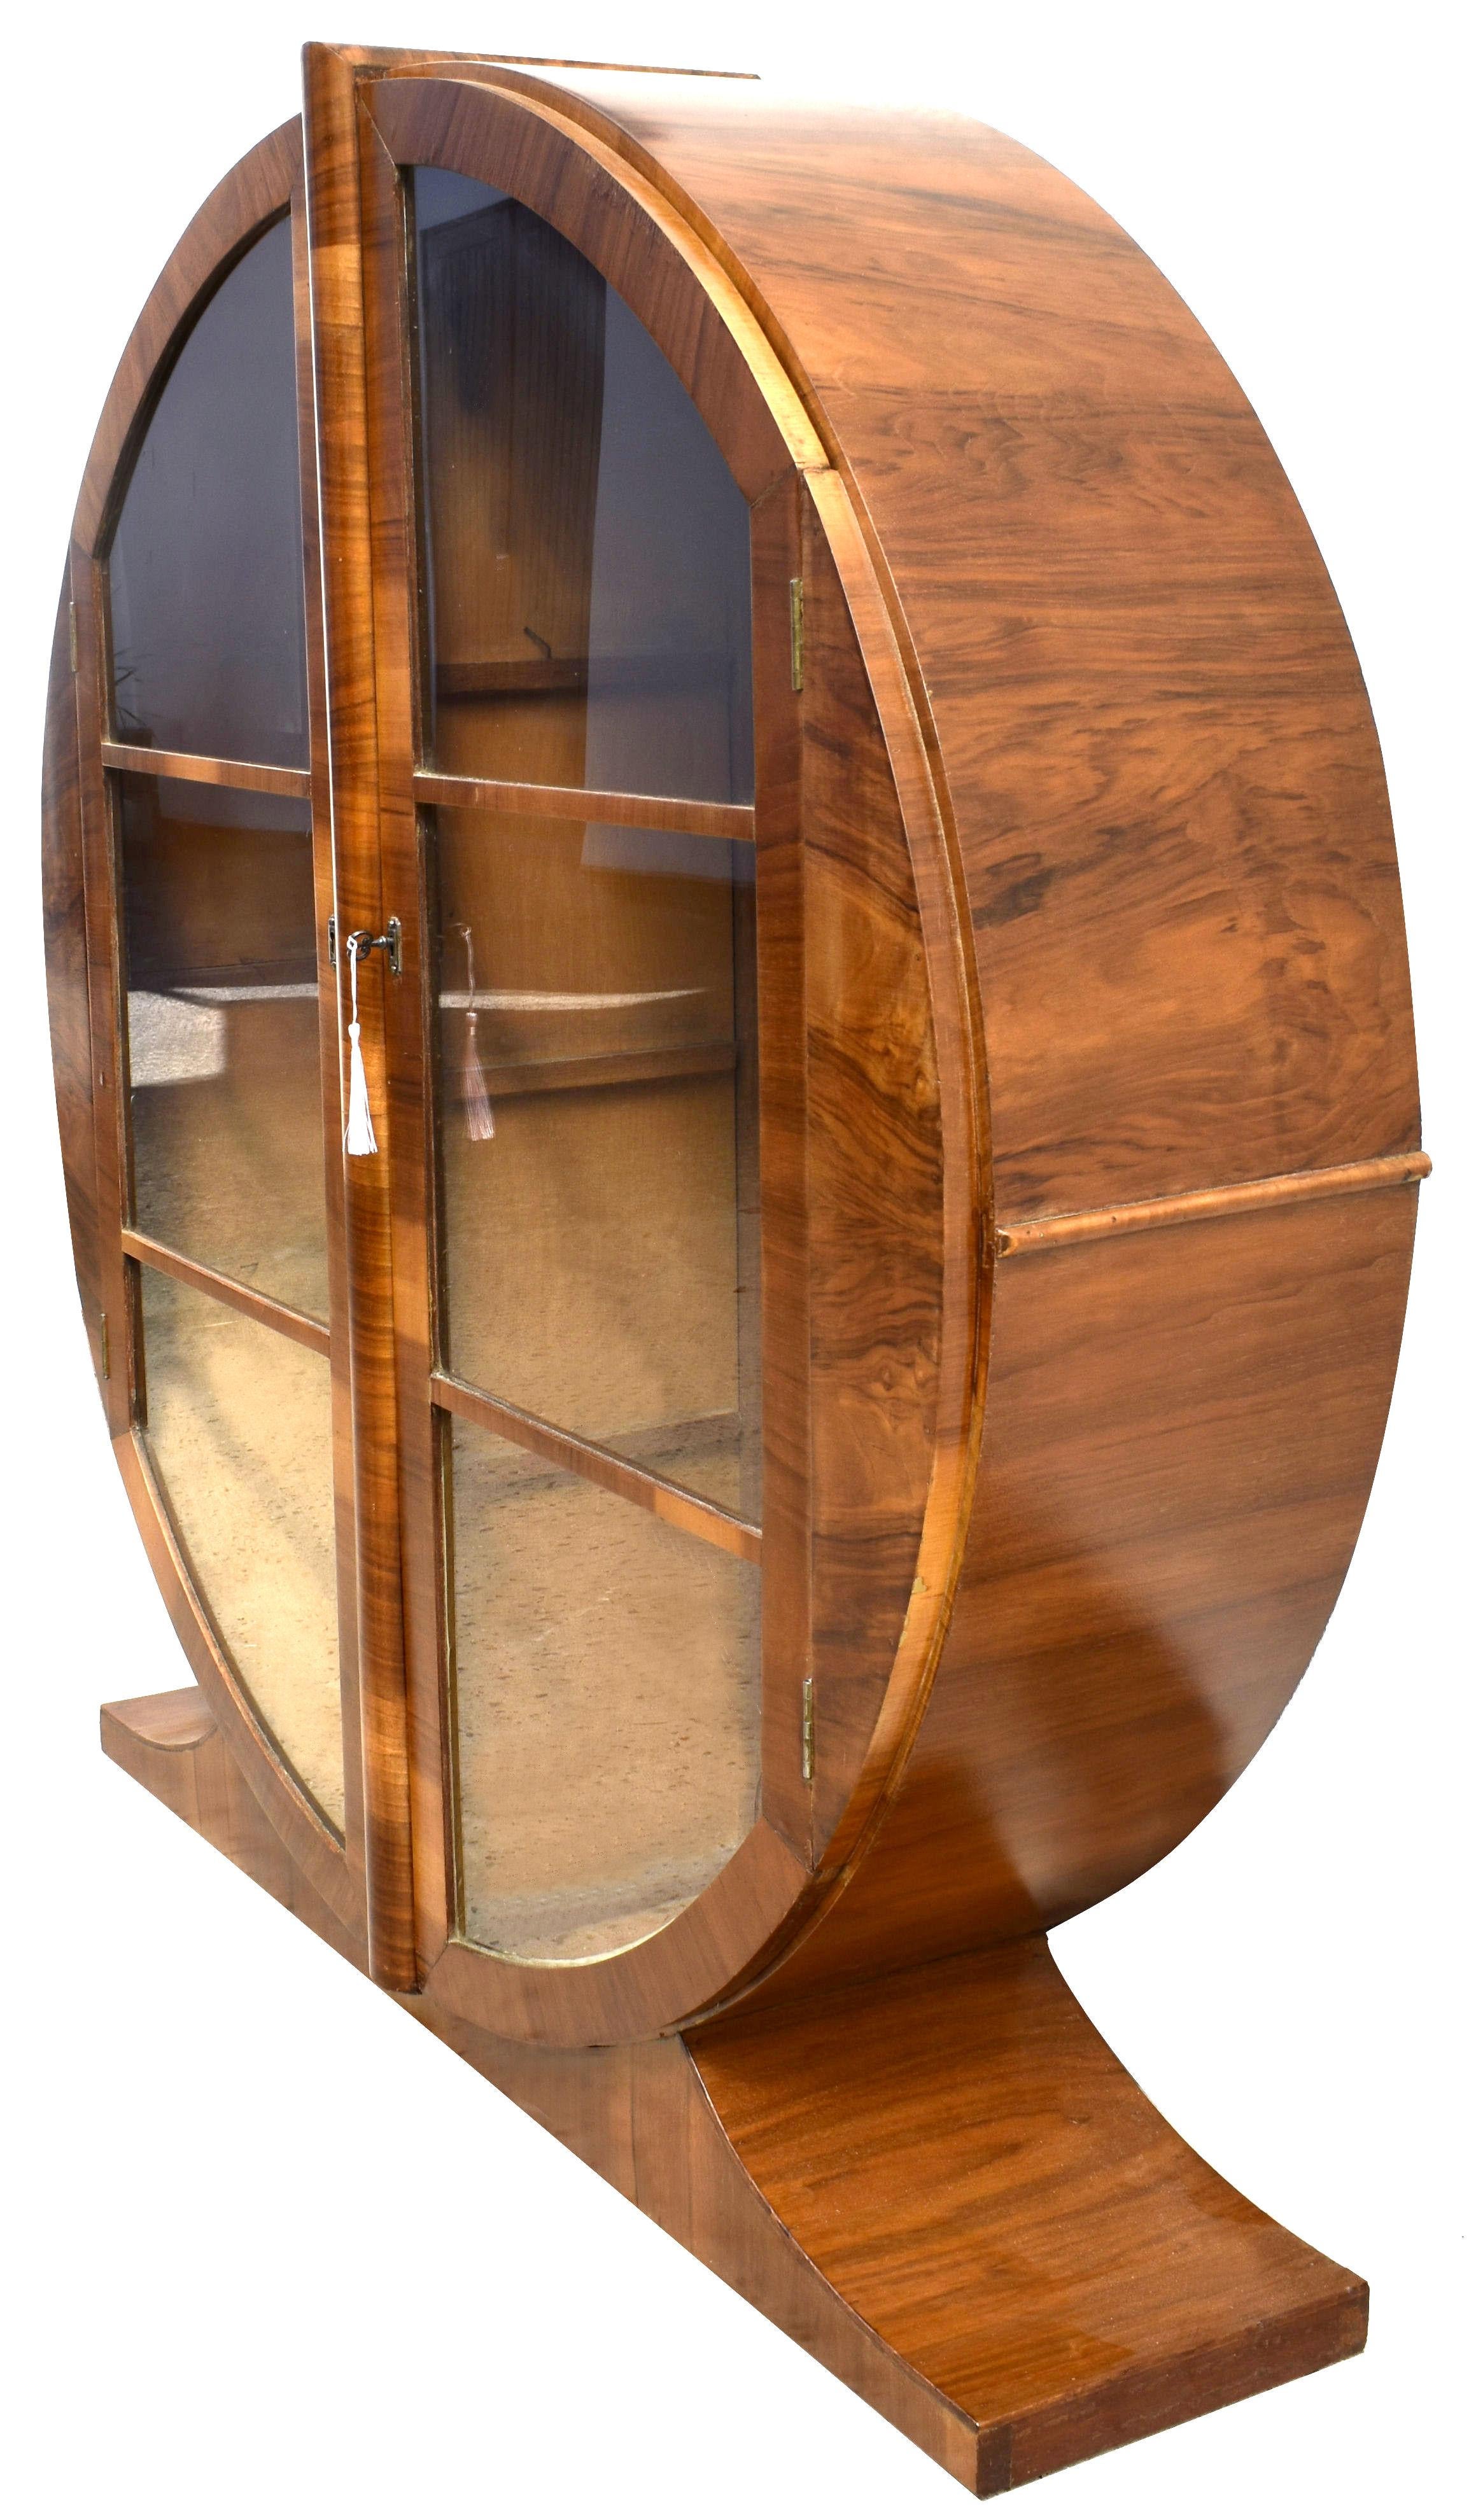 Offered for your consideration is this superbly stylish and totally original 1930s English Art Deco round display cabinet. Figured walnut veneer in a warm mid-tone coloring with a distinctive light and dark alternation running throughout and